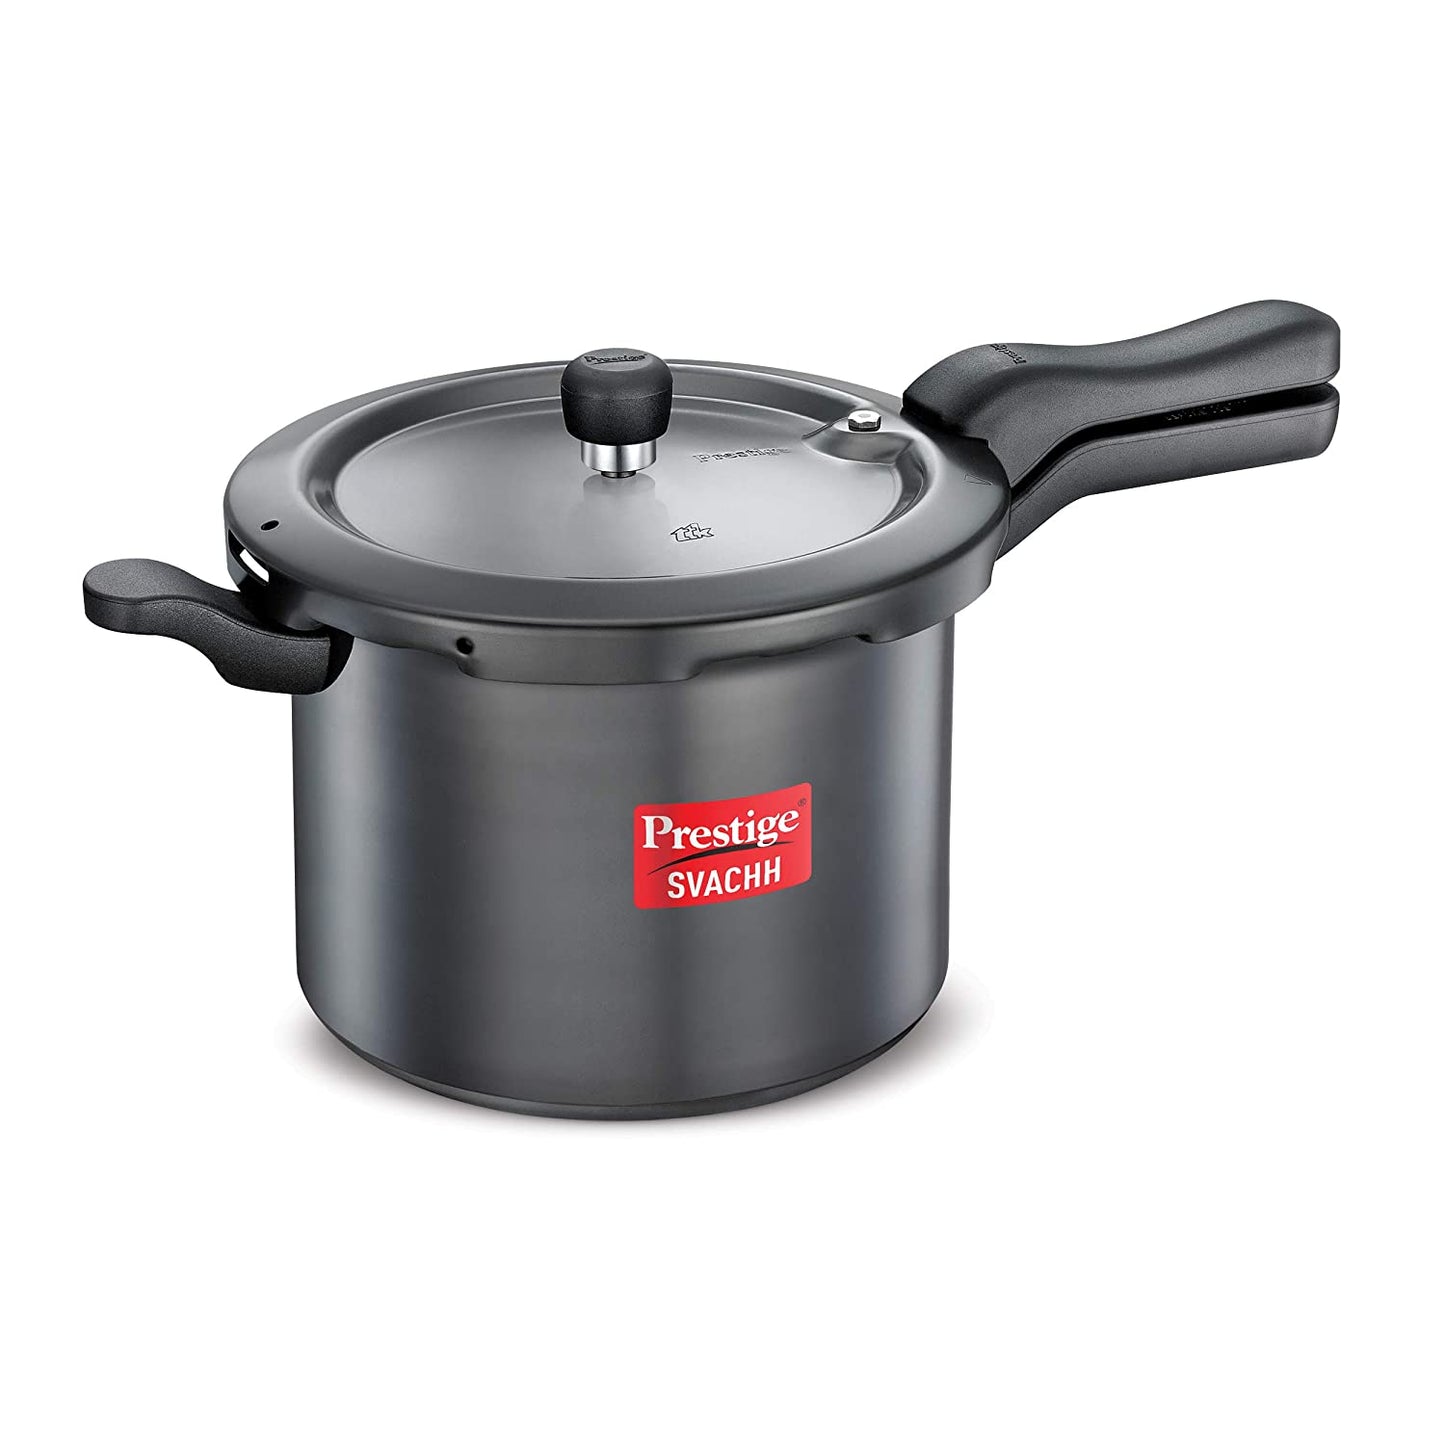 Prestige Svachh Hard Anodised Aluminium Induction Base Outer Lid Pressure Cooker, 7.5 Litres